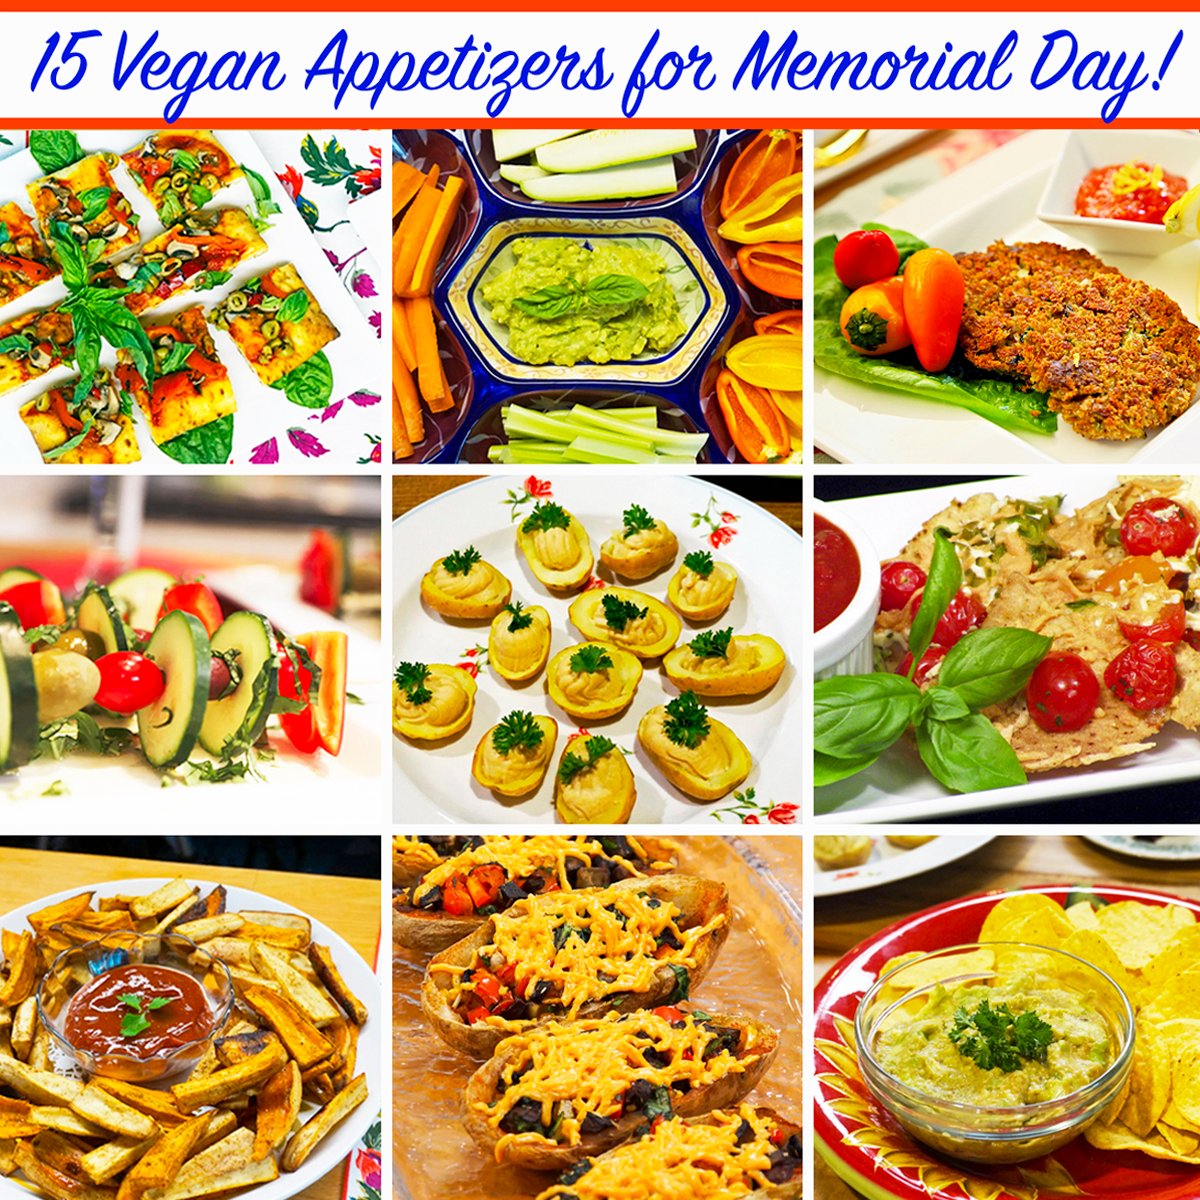 Are you looking for small bites and tasty appetizers for  Memorial Day? These fifteen colorful vegan #recipes will impress and satisfy! jazzyvegetarian.com/10-festive-veg…

#guacamole #hummus #plantbased #plantbasedrecipes #salsa #vegan #veganmemorialdayrecipe #veganrecipes #memorialday #yum